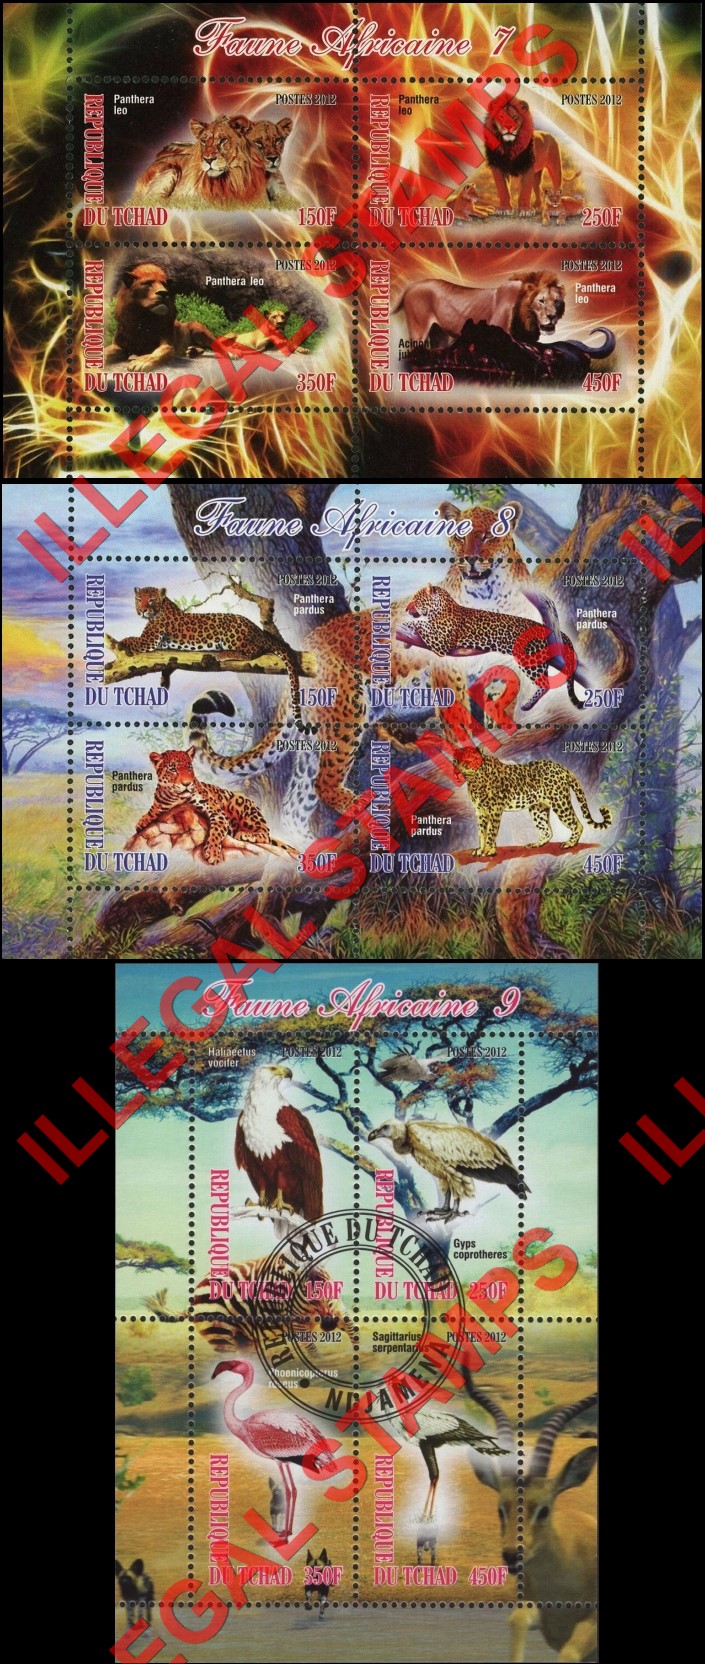 Chad 2012 African Fauna Animals Illegal Stamps in Souvenir Sheets of 4 (Part 3)